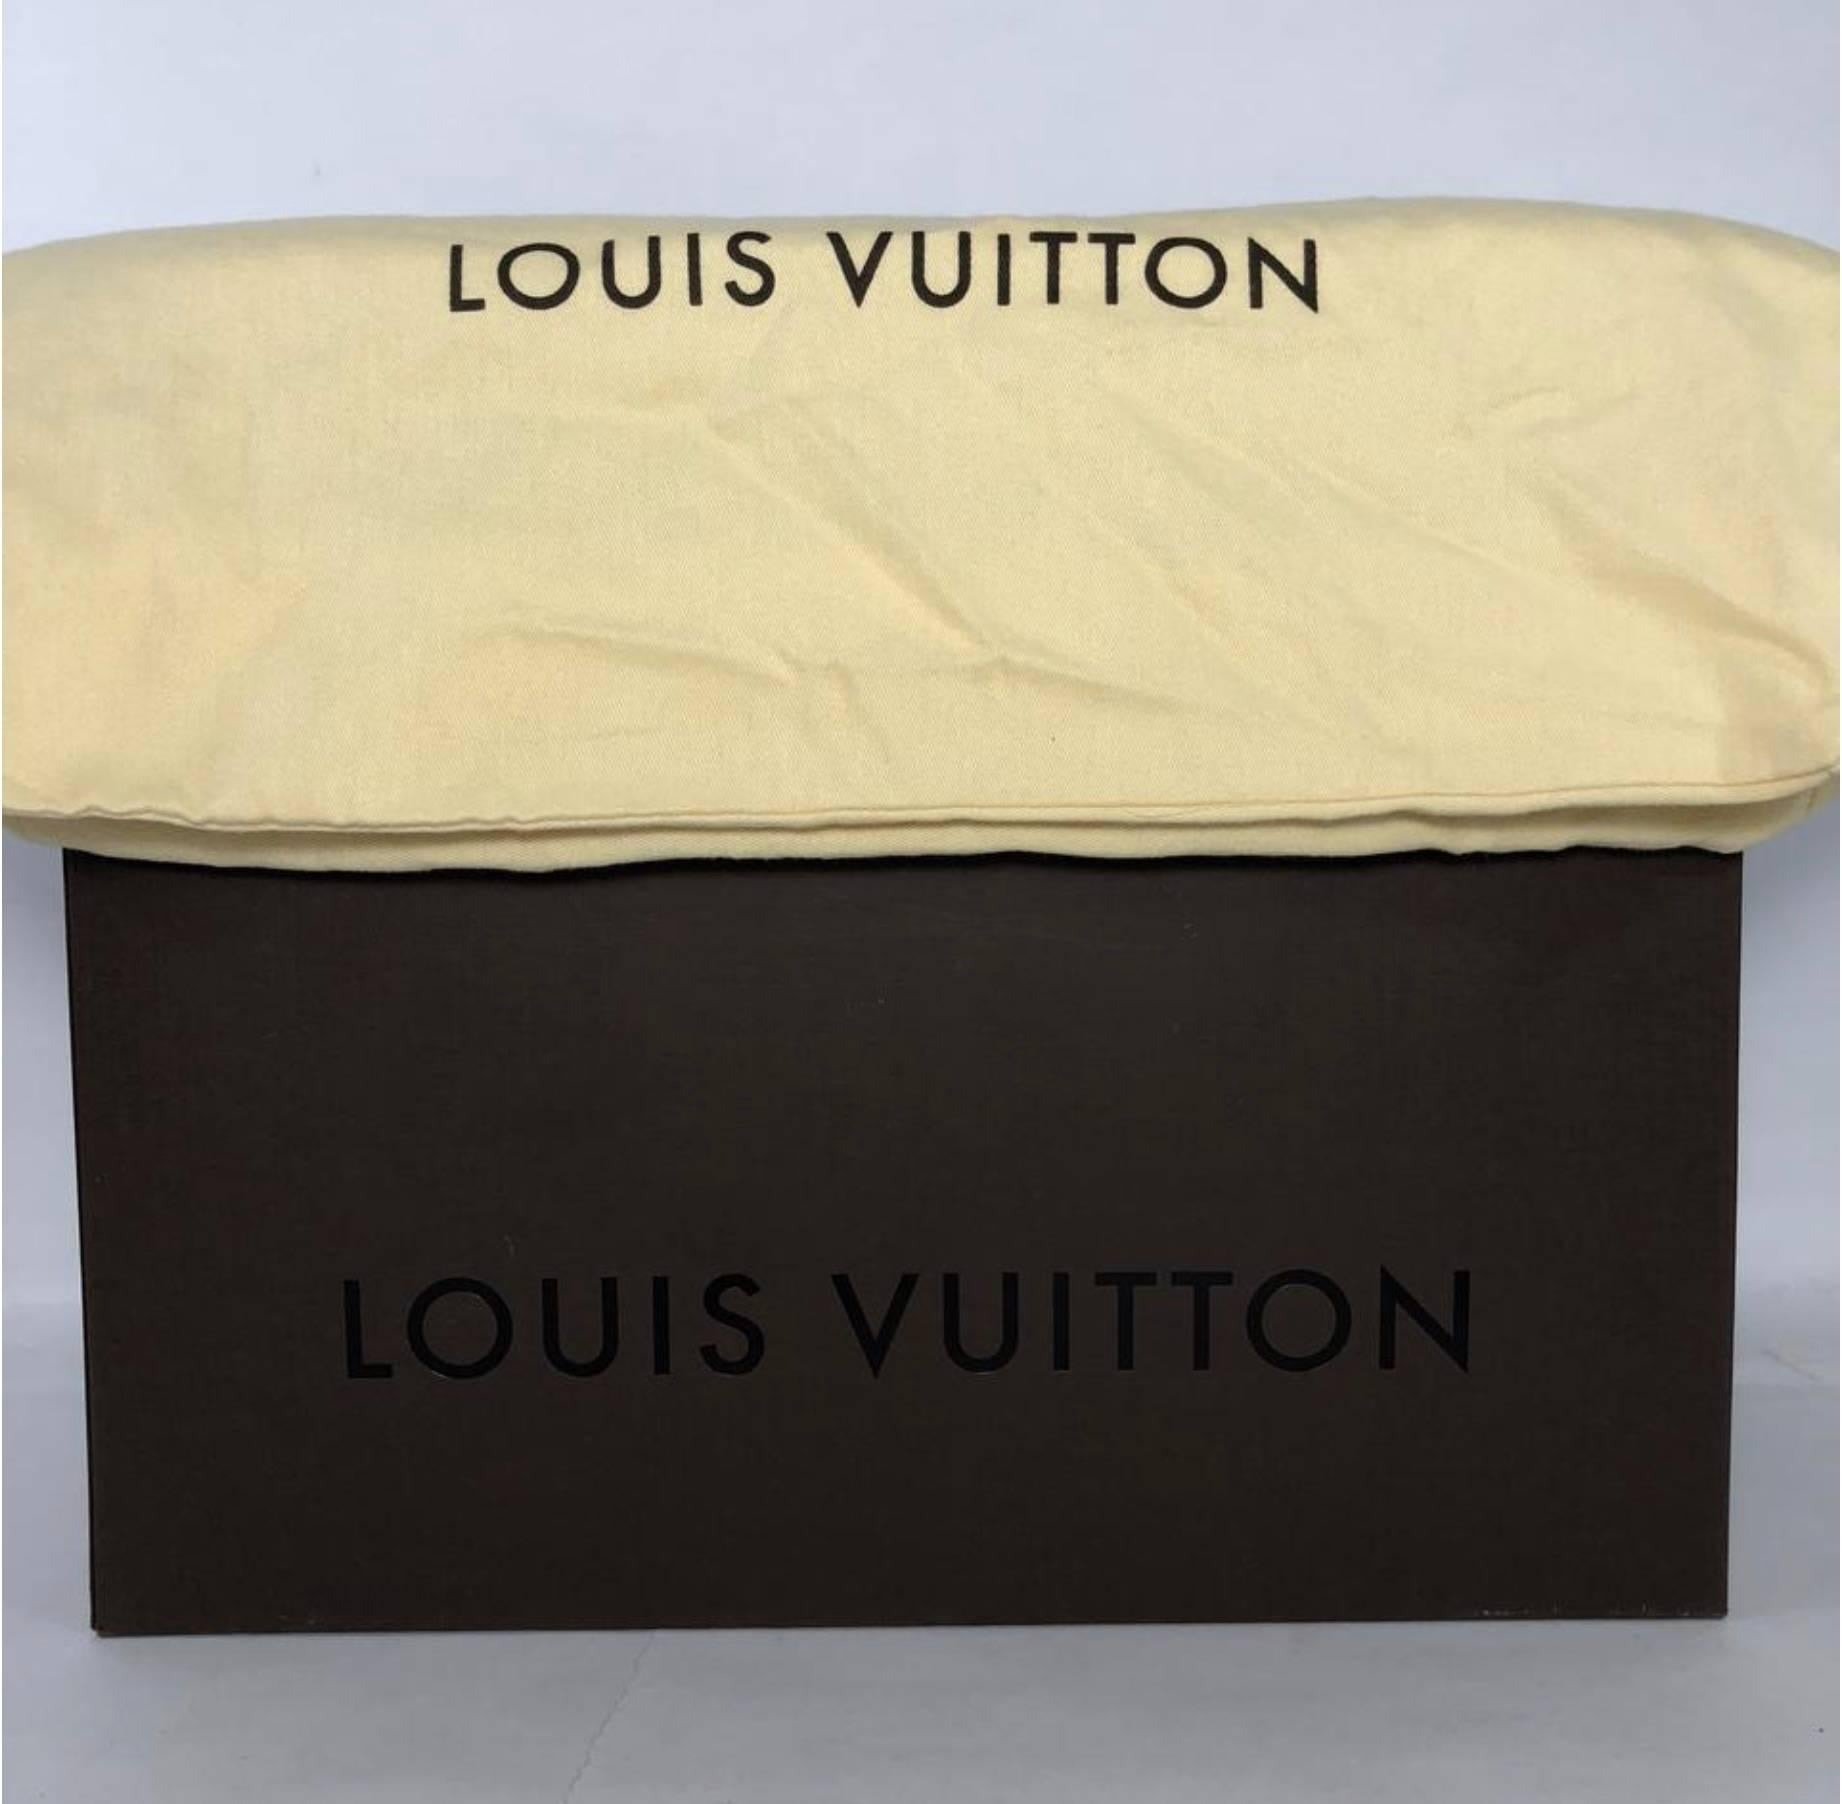 MODEL - Louis Vuitton Python Artsy in Gris (Brown)

CONDITION - RARE!  Looks almost New!  The only sign of wear is a very small spot on interior leather on sidewall panel.  

SKU - 2286

ORIGINAL RETAIL PRICE - 11500 + tax

DATE/SERIAL CODE -